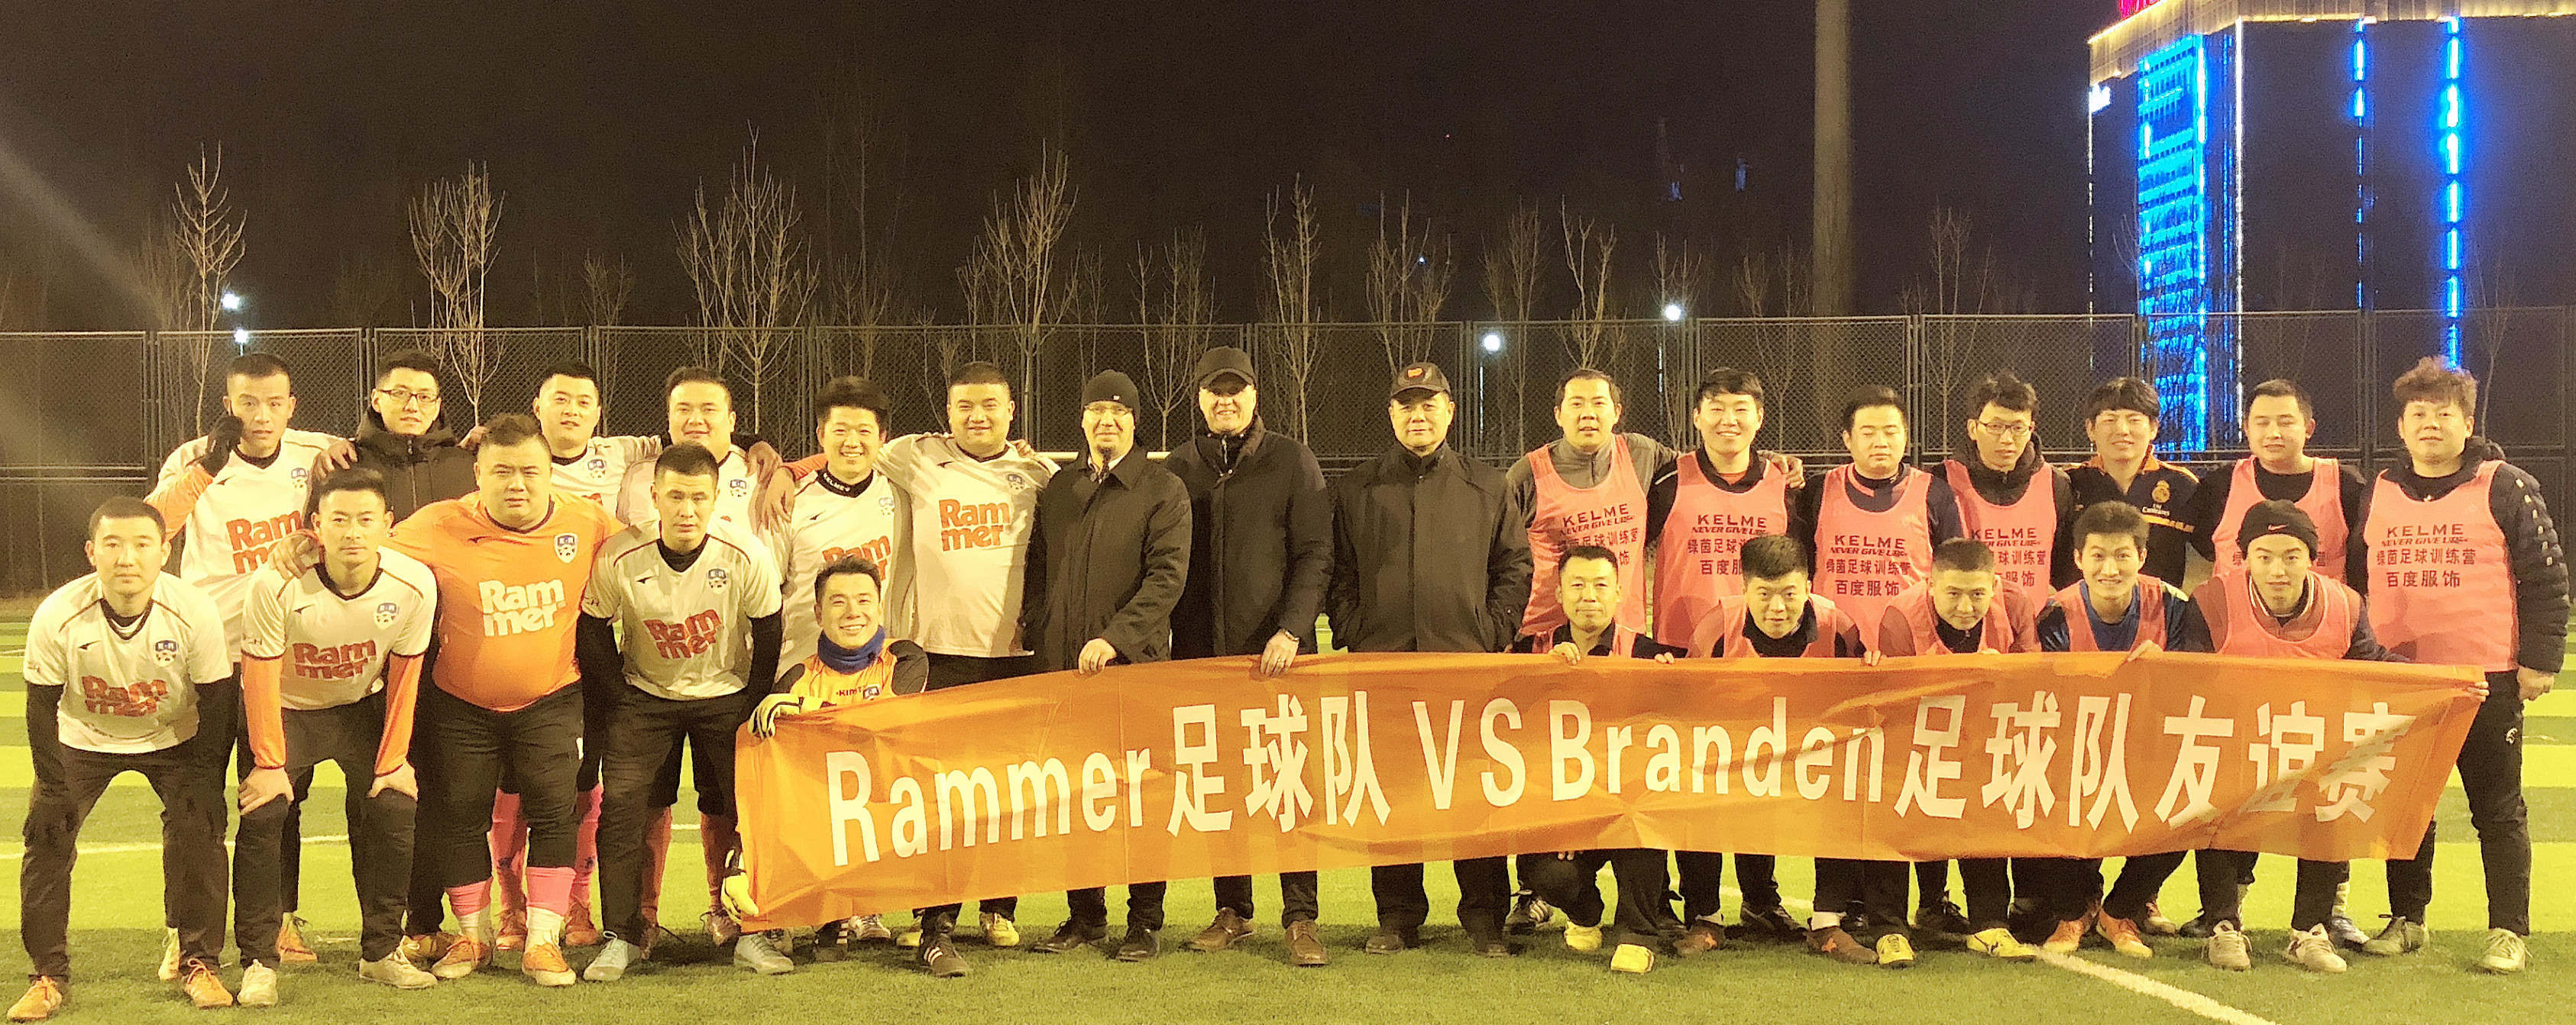 Rammer Team Have Been Cutting An Irresistible In League Football Matches!